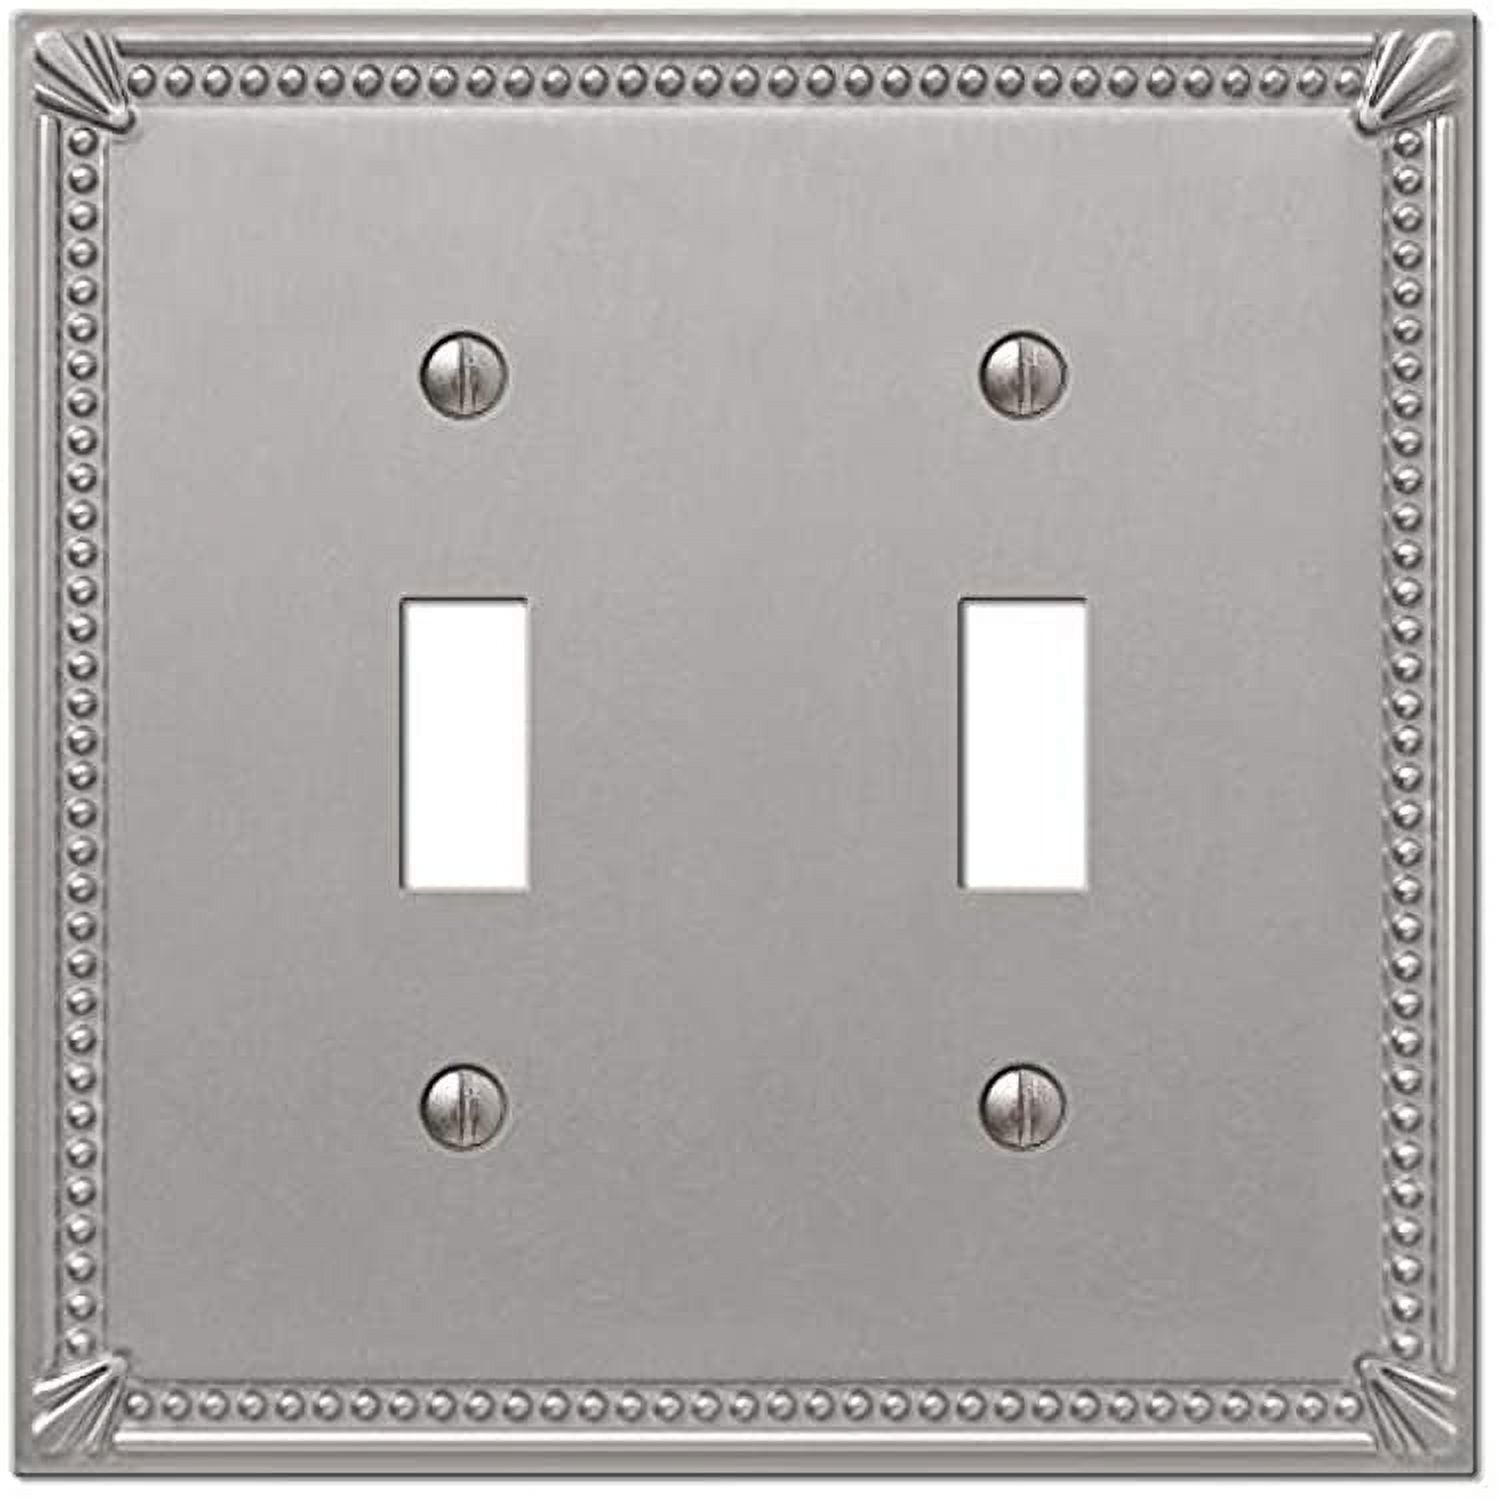 Picture of Amerelle 3009138 Imperial Bead Brushed Nickel 2 Gang Metal Toggle Wall Plate, Gray